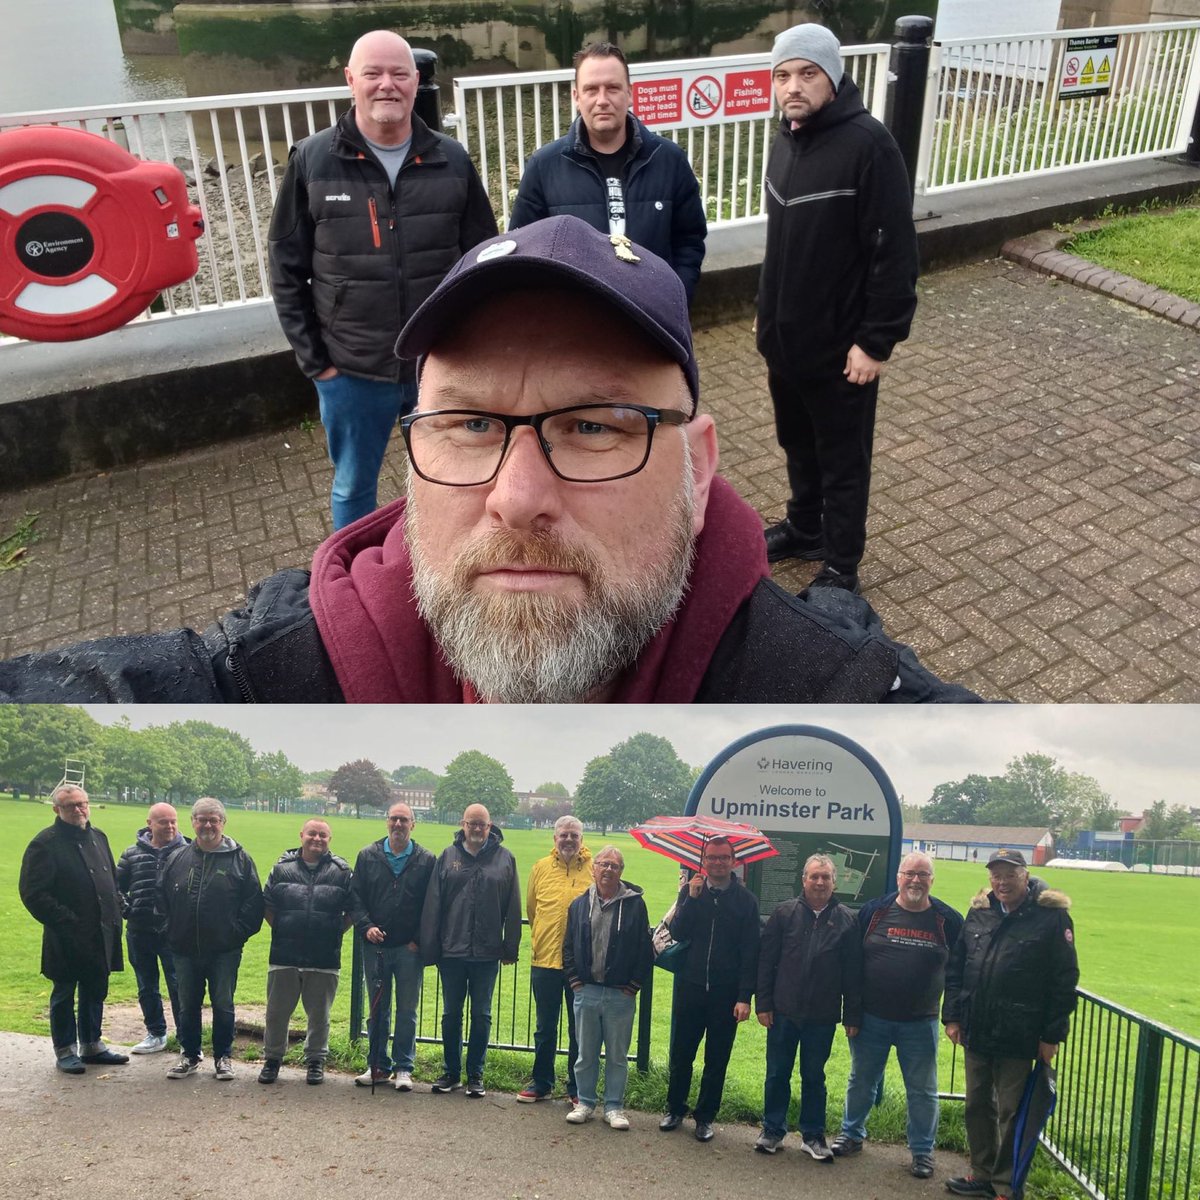 Another wet one but good one! Well done lads tonight on your walk and talks Teams Woolwich and Upminster out and about this evening Having a chat and a walk what’s not to love Get yourself involved next week just send me a message to find out how you can get involved